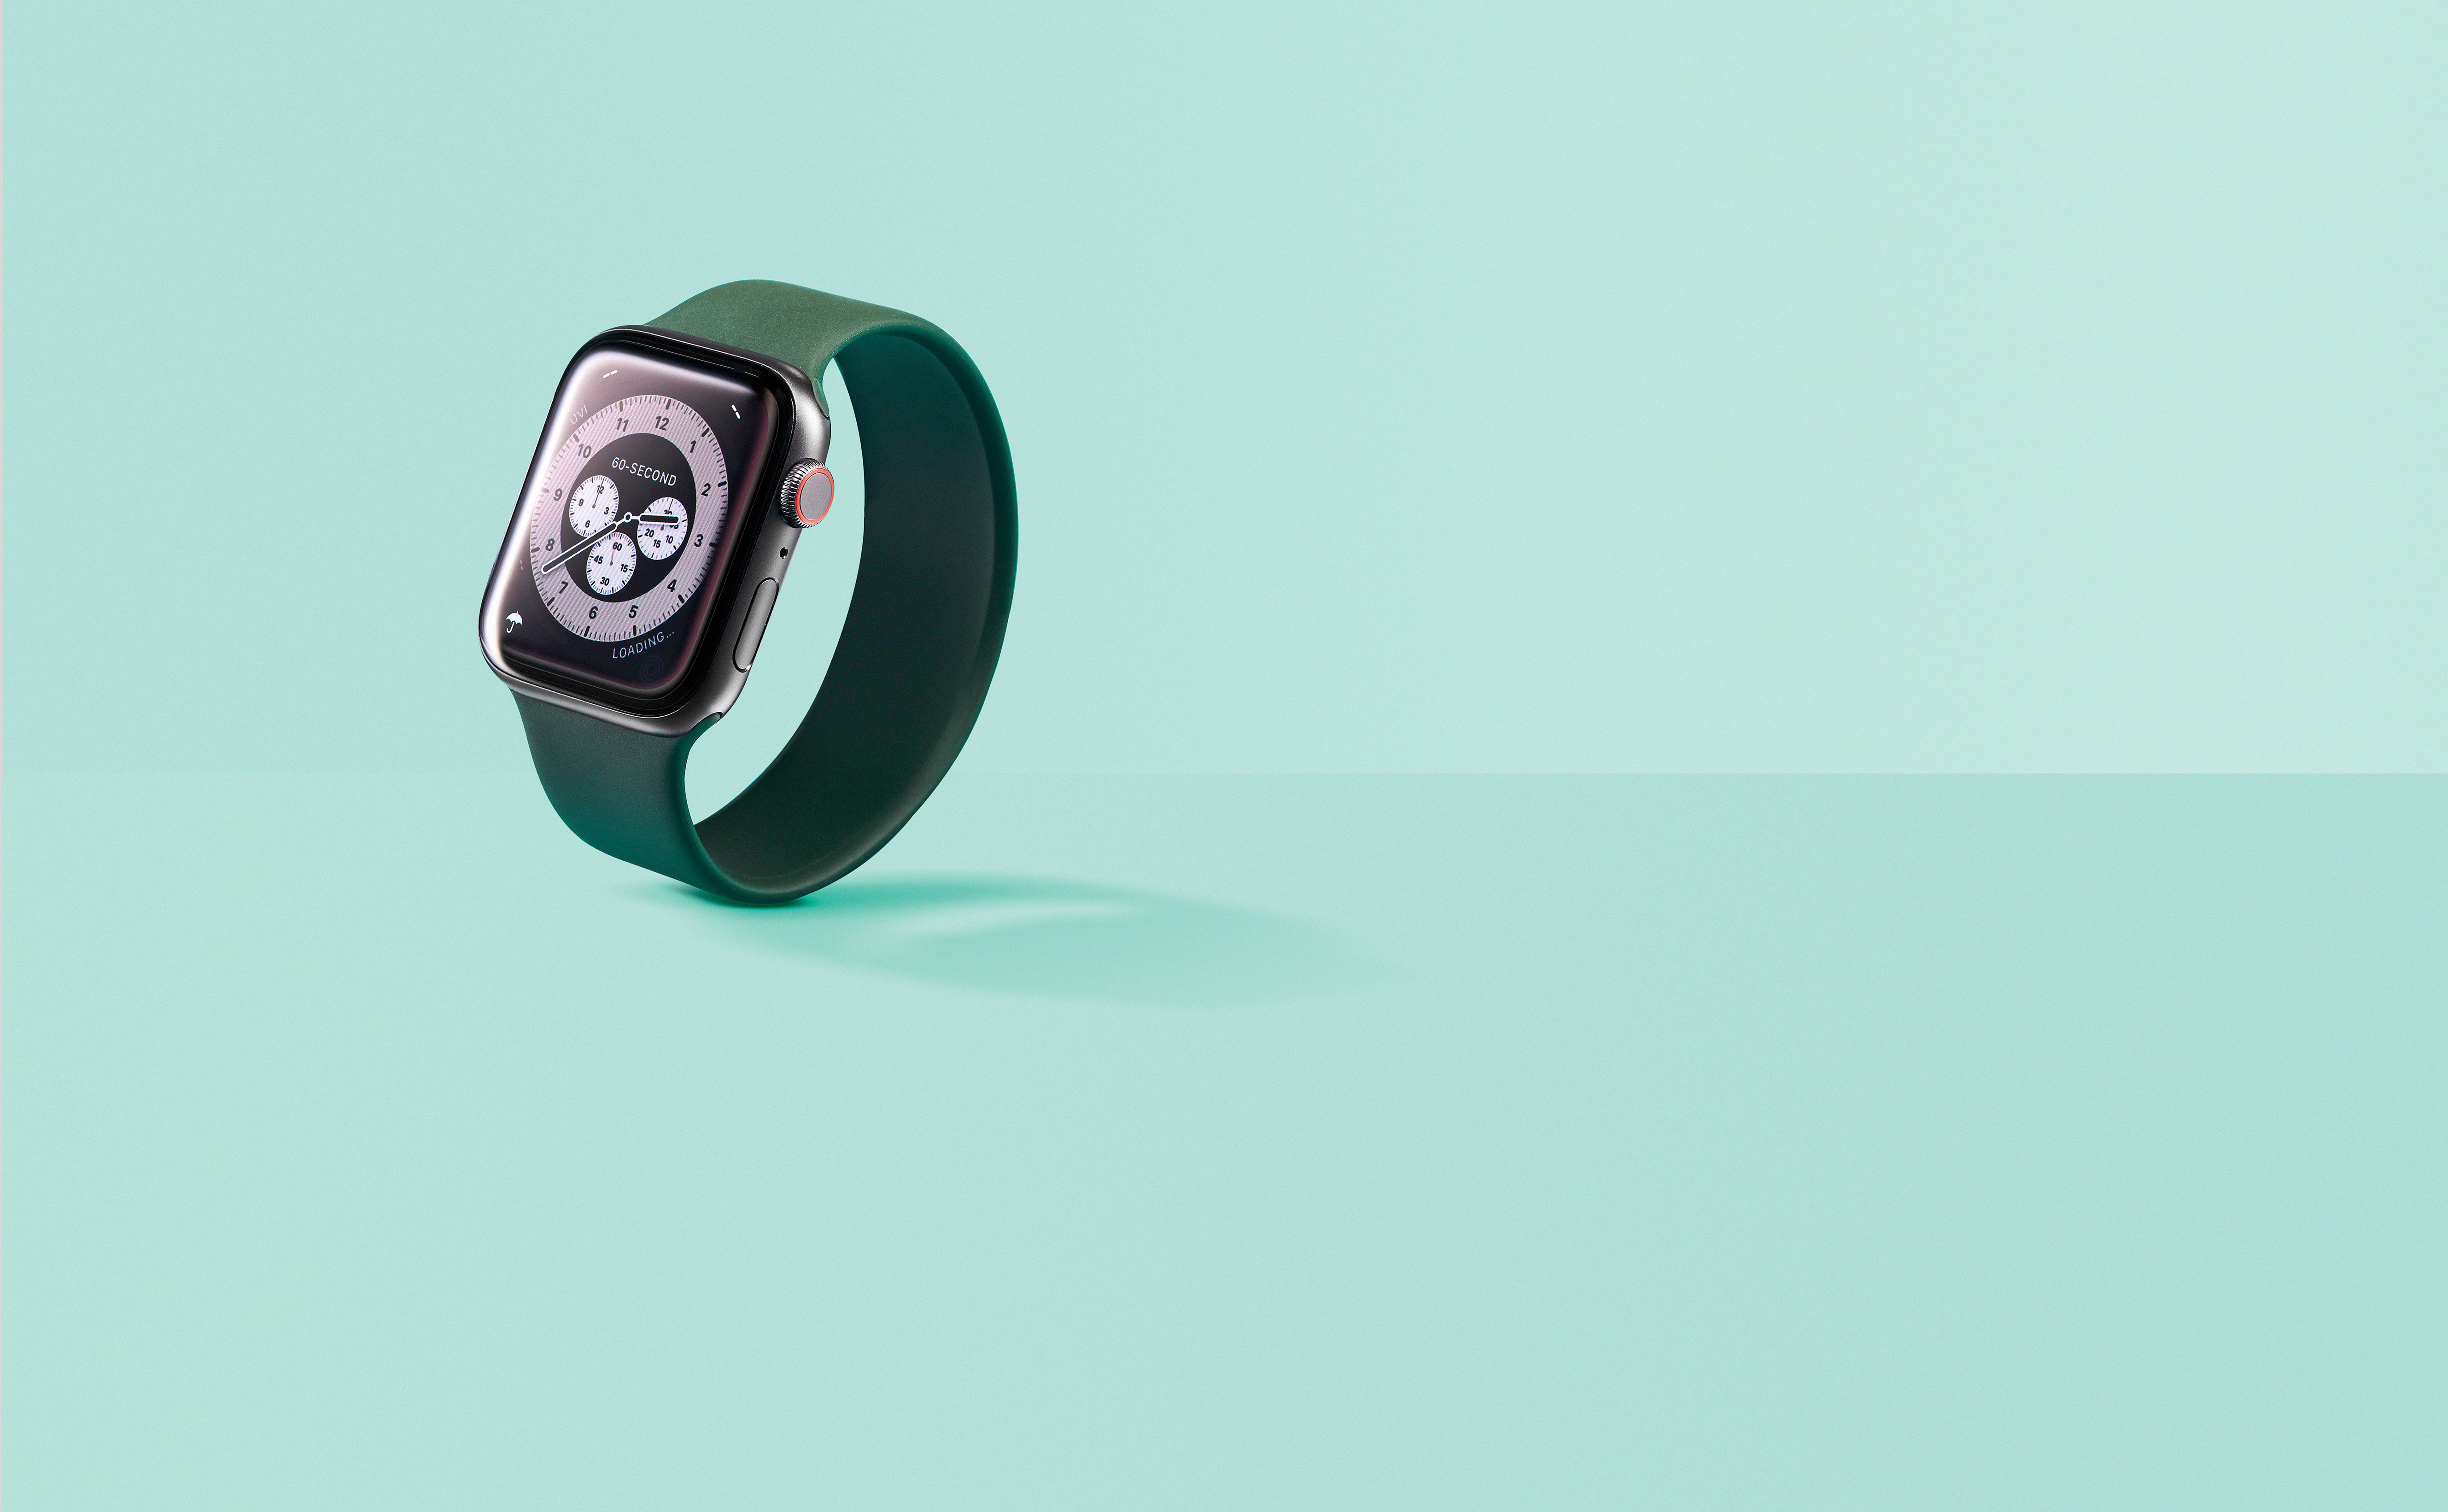 Apple watch depicted against light blue background 